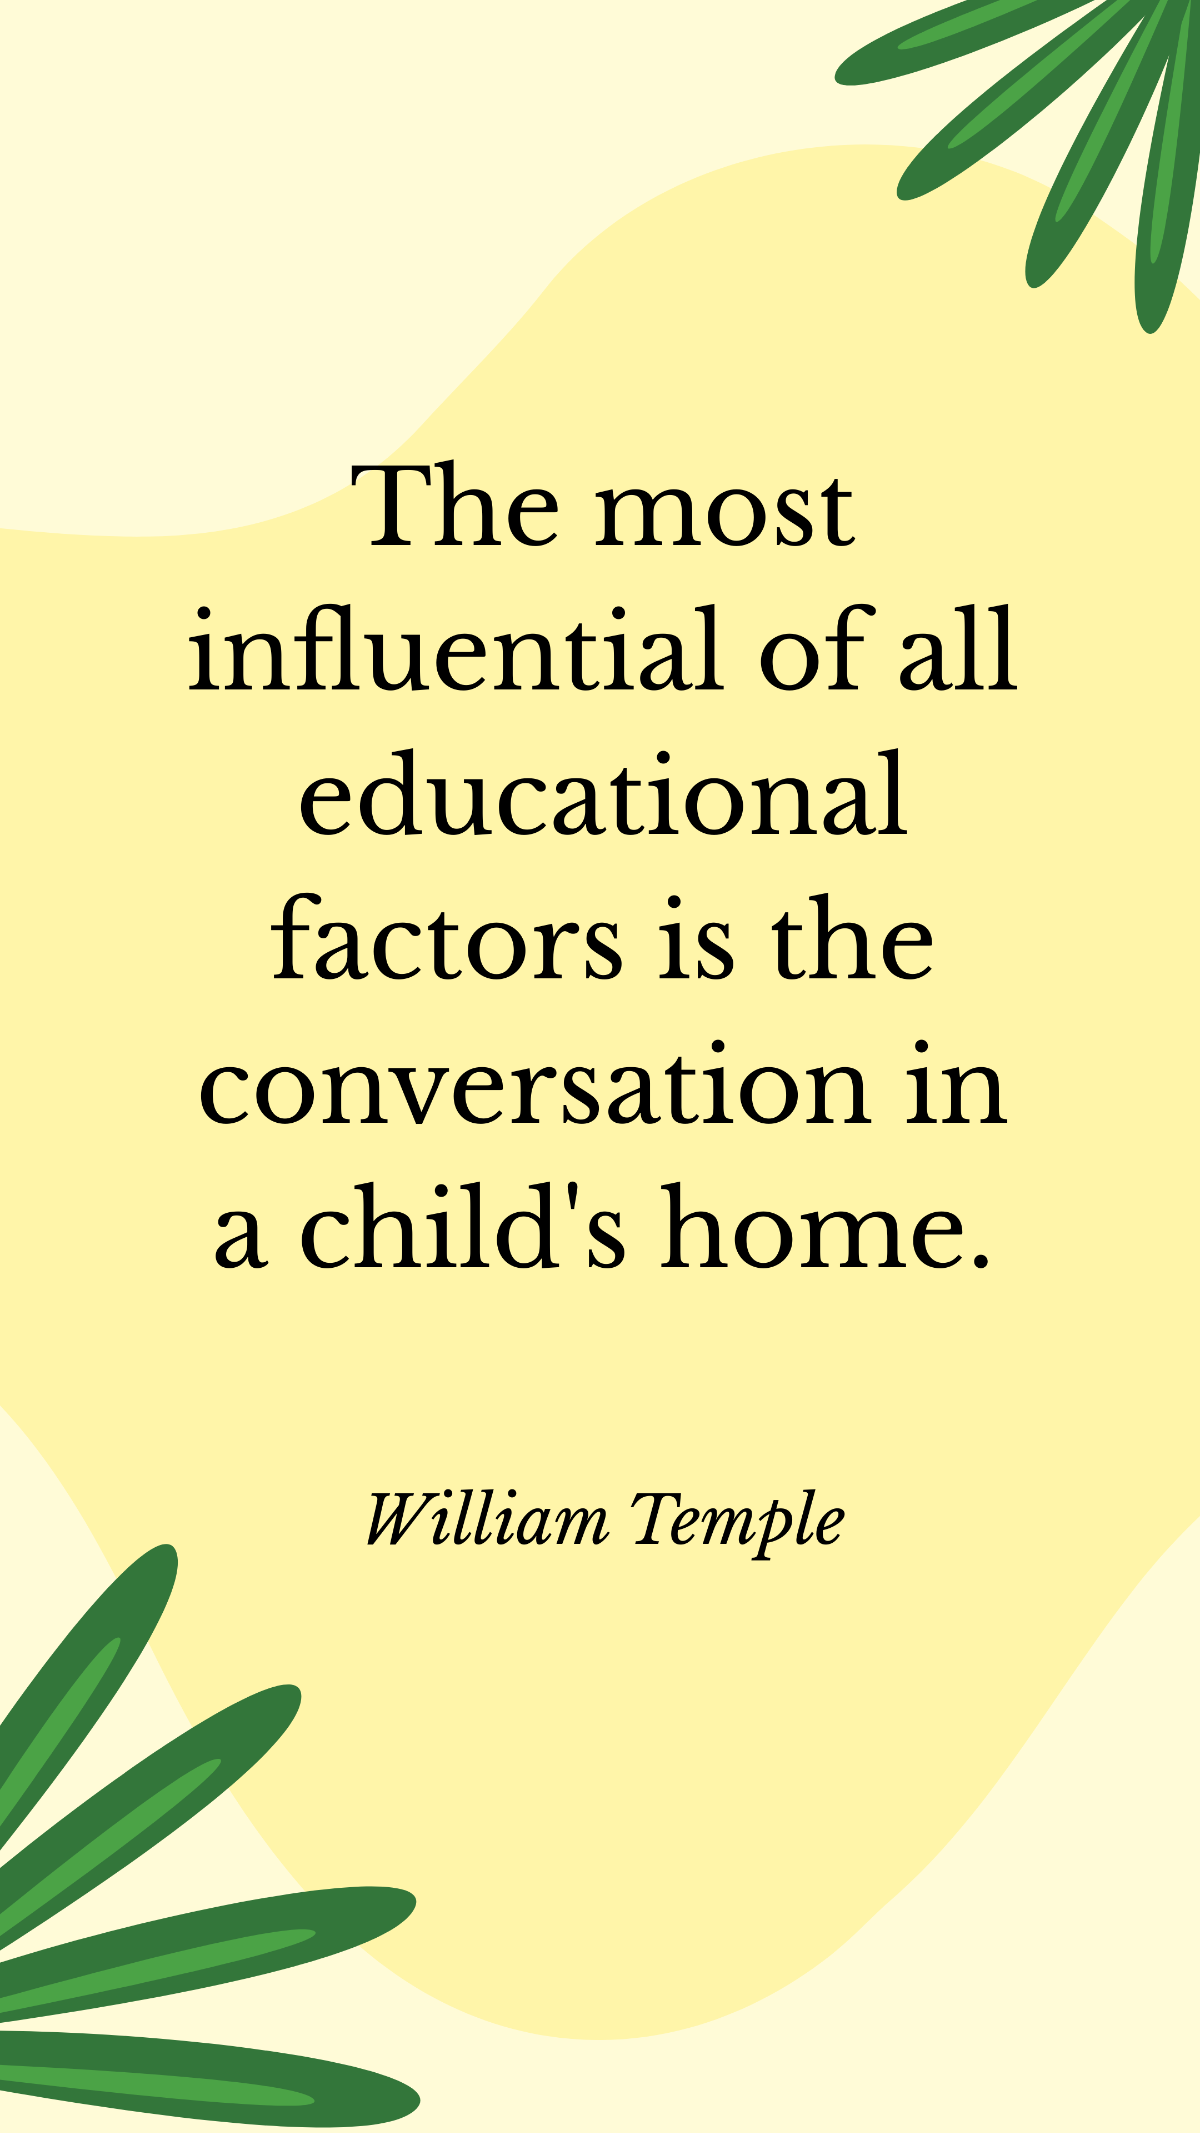 William Temple - The most influential of all educational factors is the conversation in a child's home.